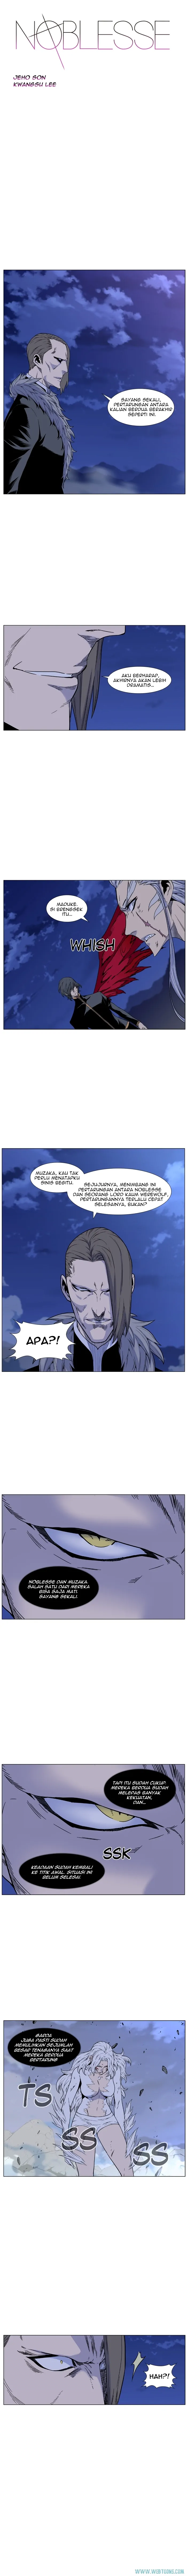 Noblesse Chapter 463 - 61